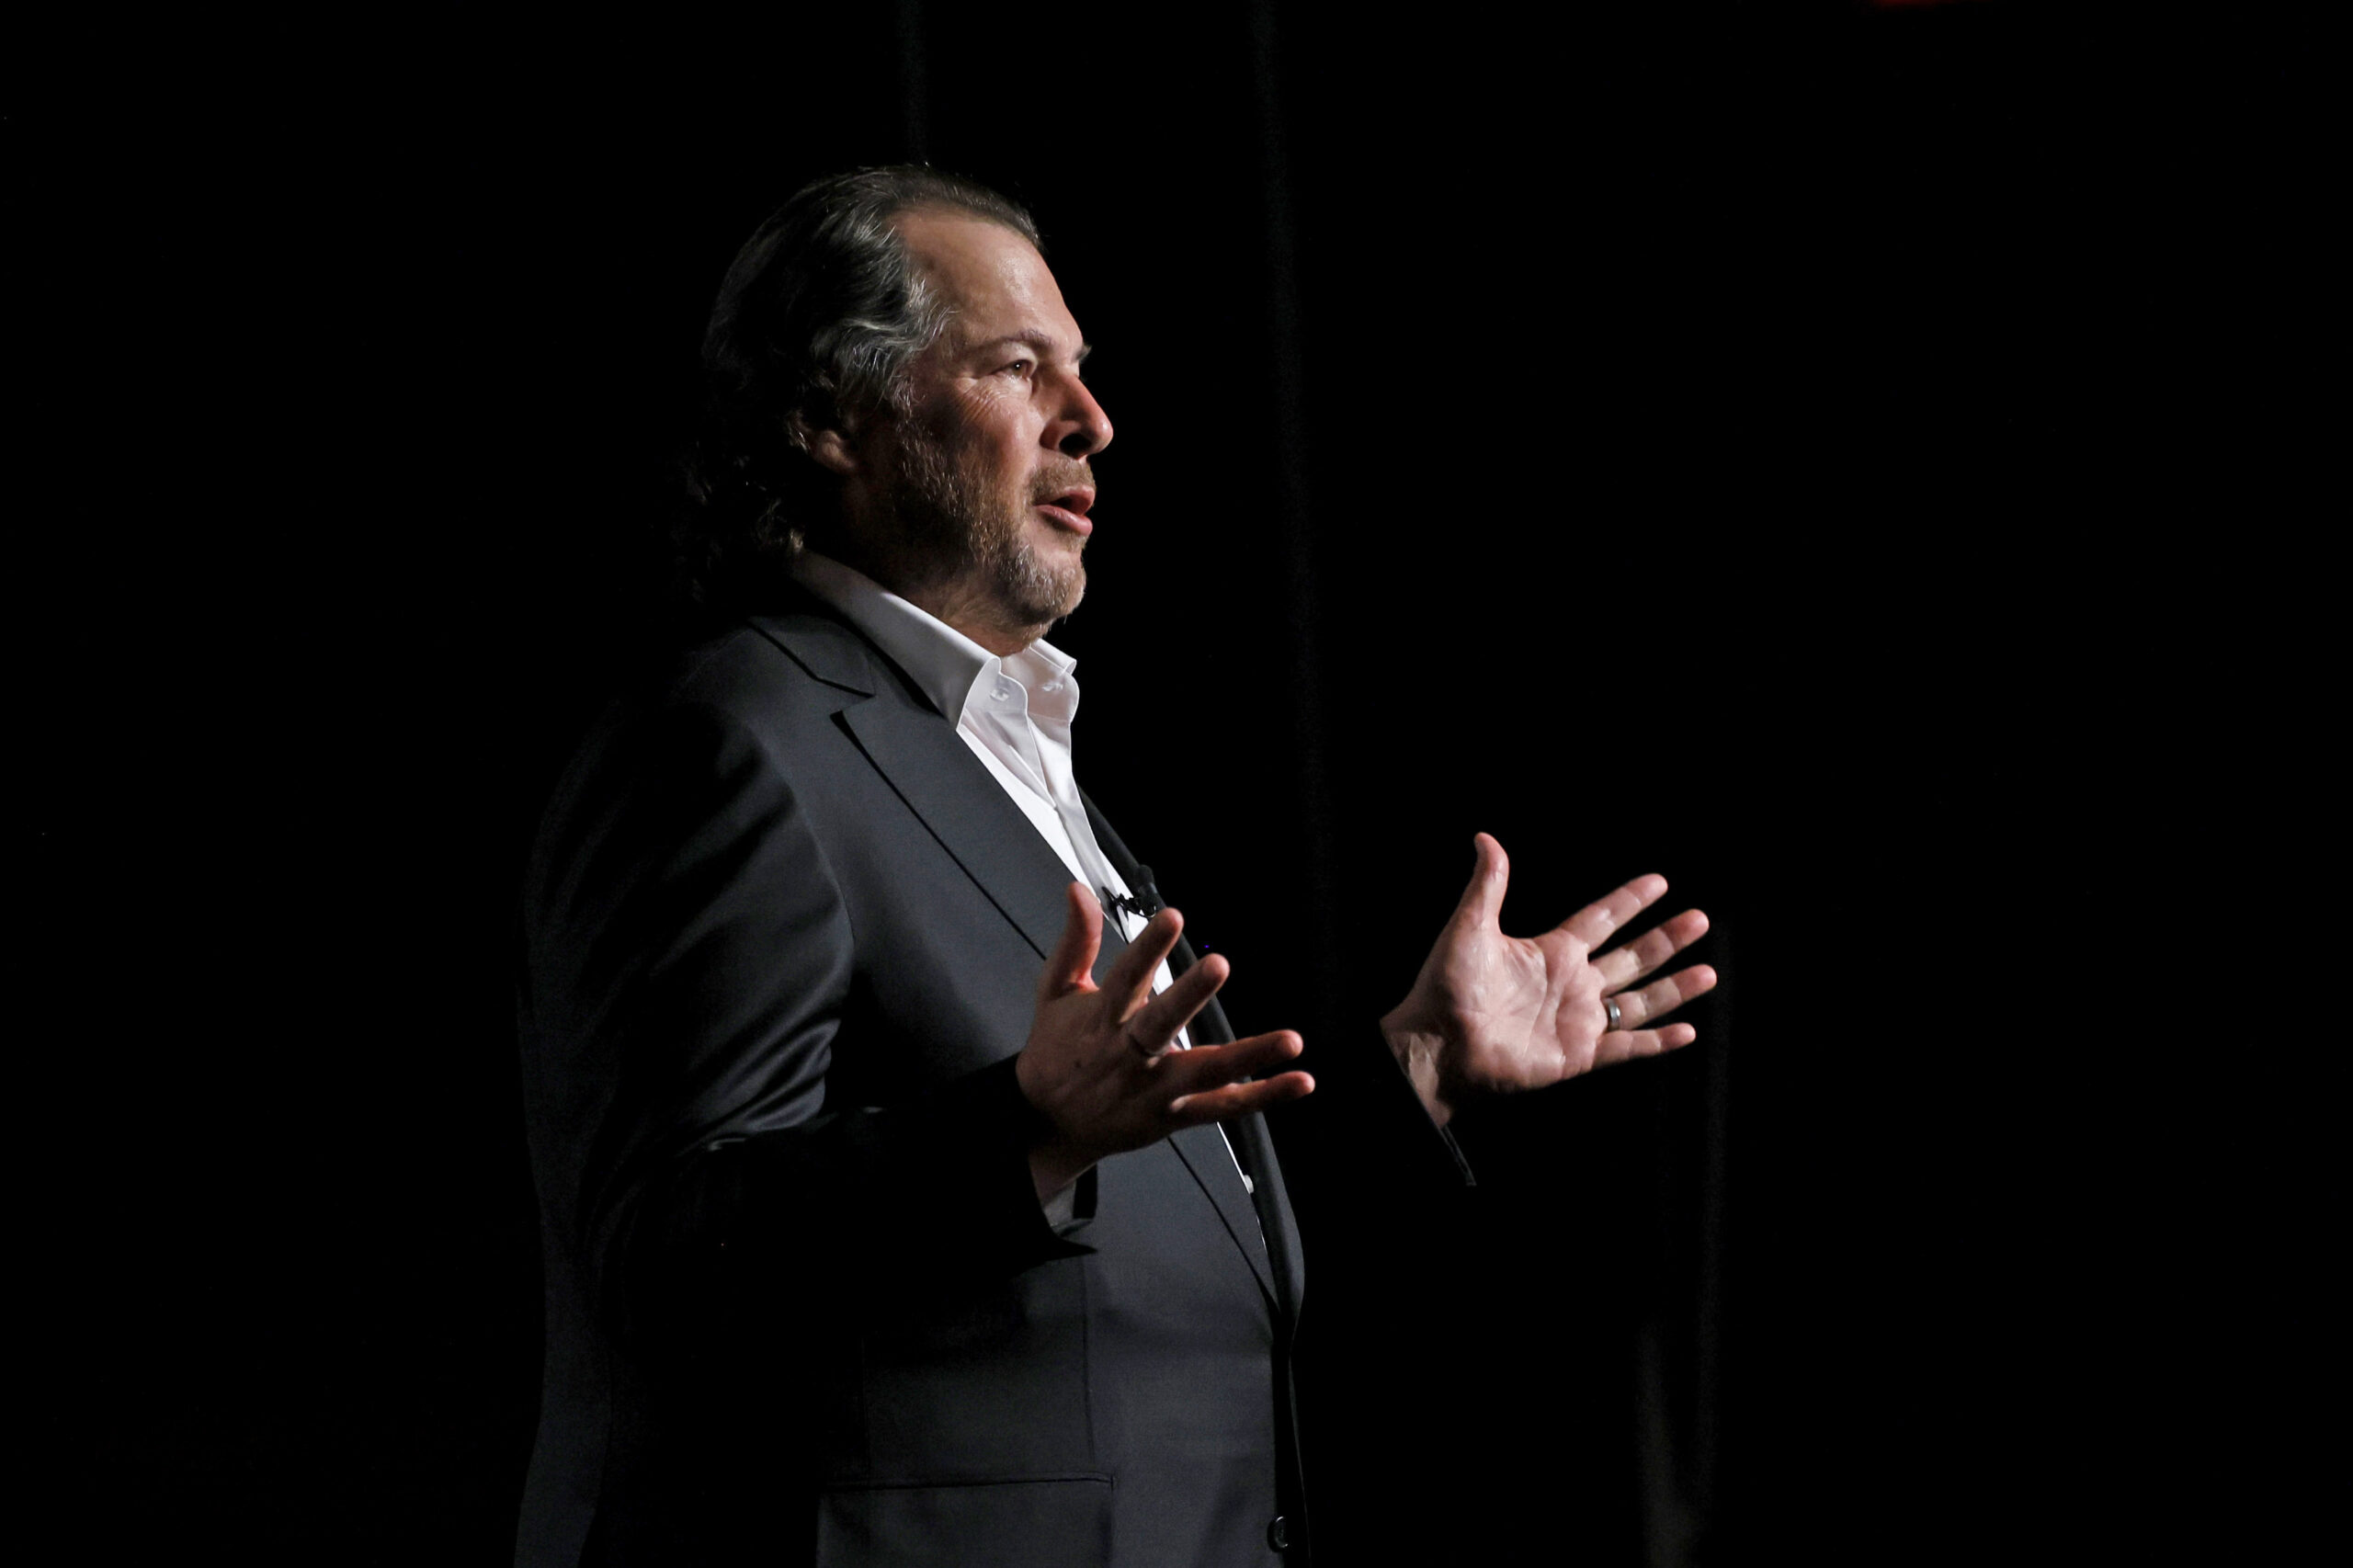 Salesforce’s Marc Benioff, Long a Champion of San Francisco, Keeps a Low Profile on the Crisis Facing Downtown